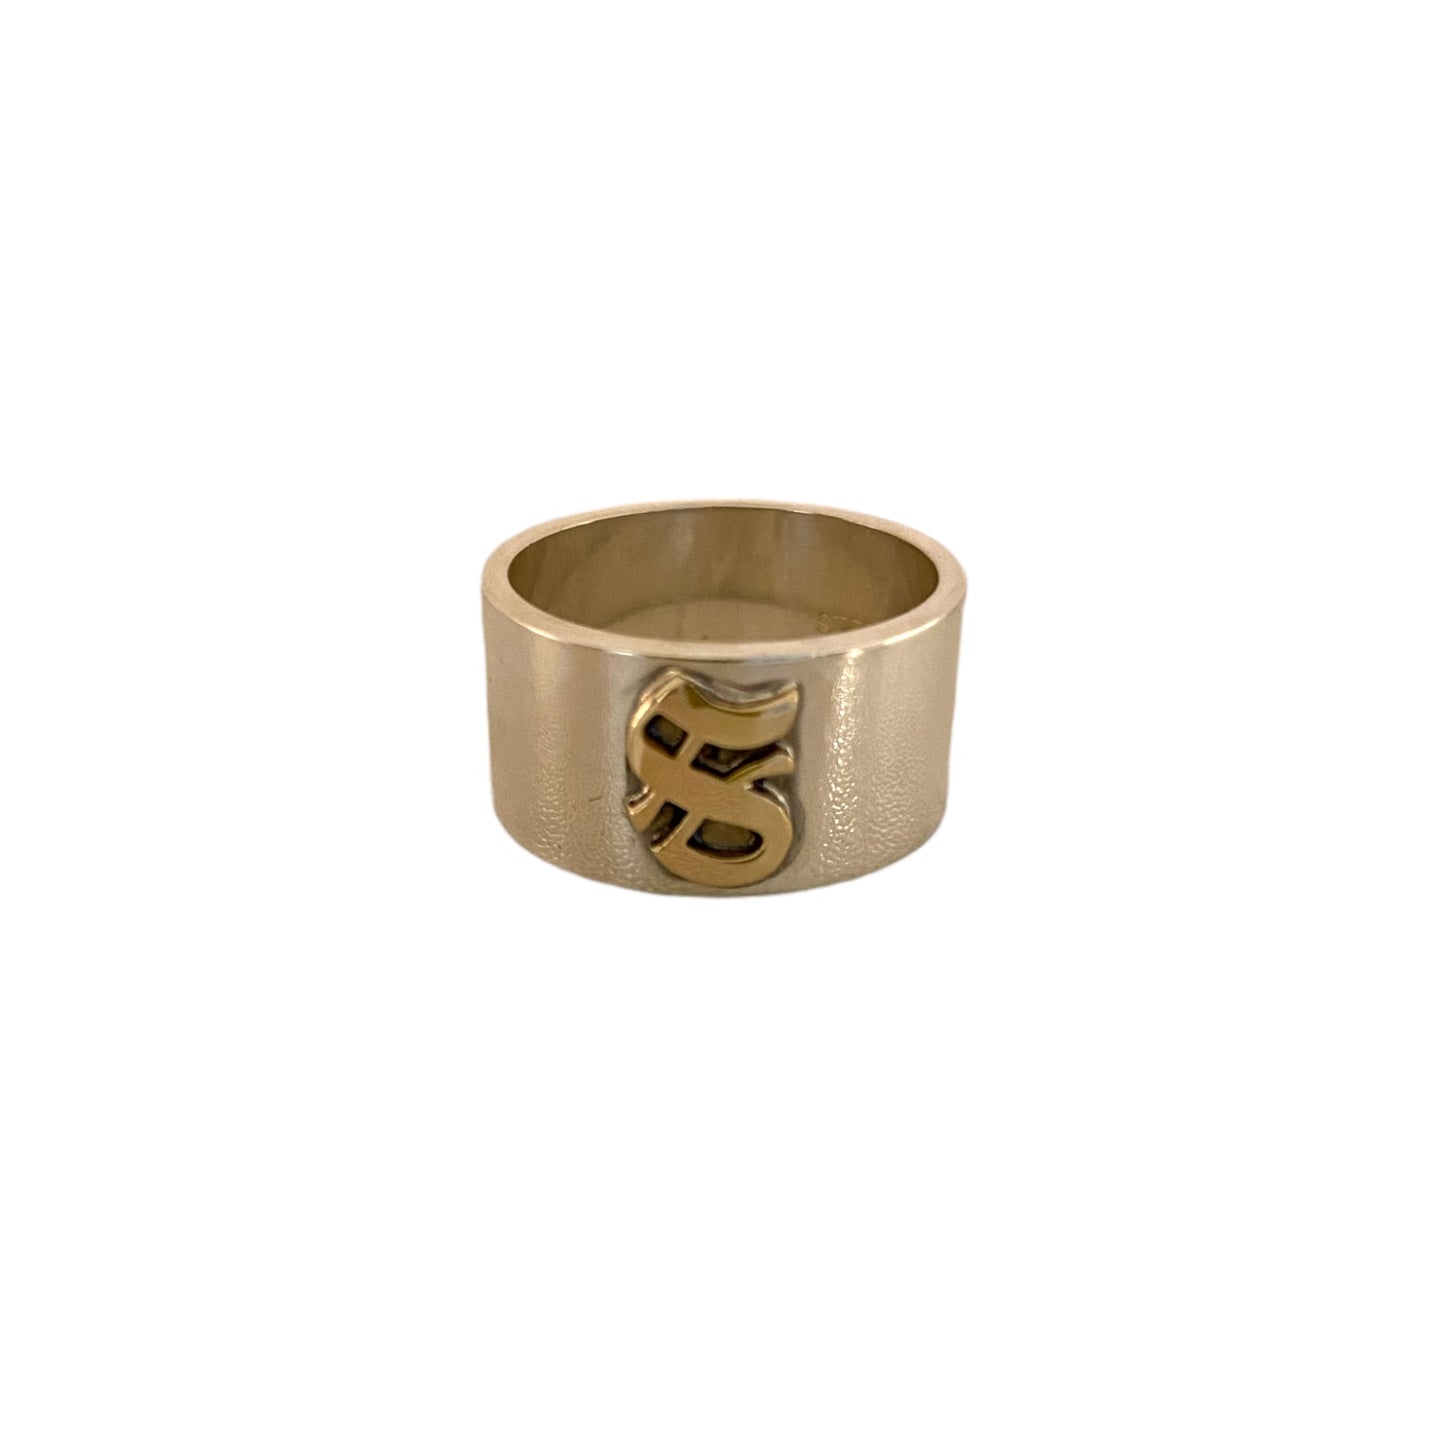 Silver Band with Gold Initial "S" Ring